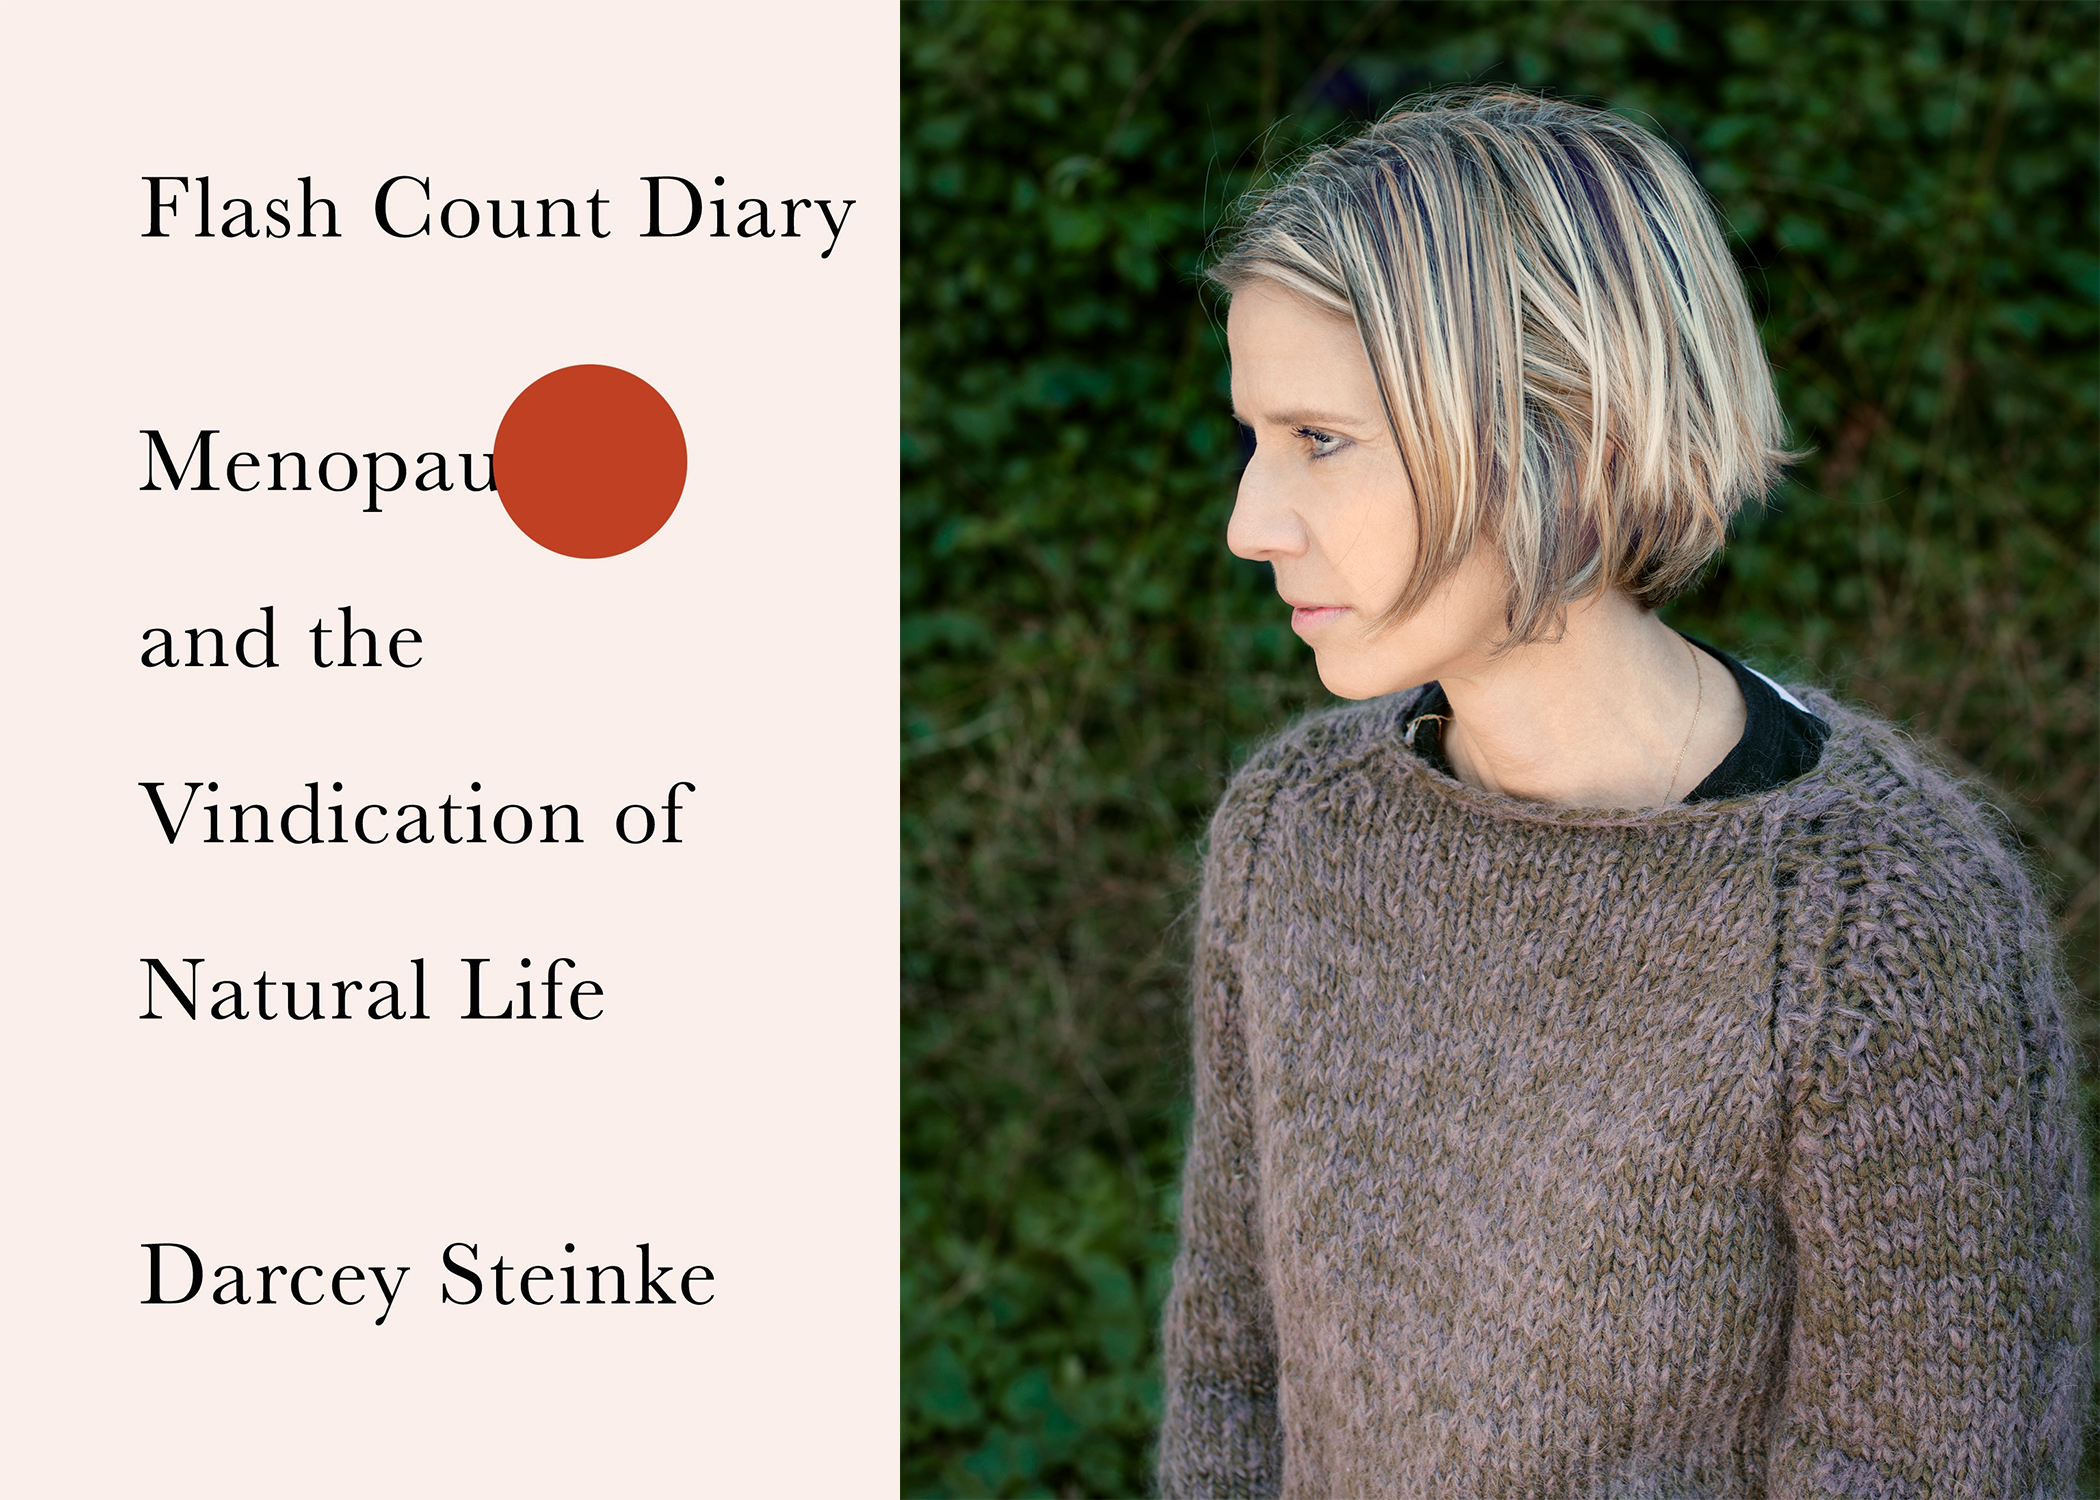 Darcey Steinke, author of Flash Count Diary